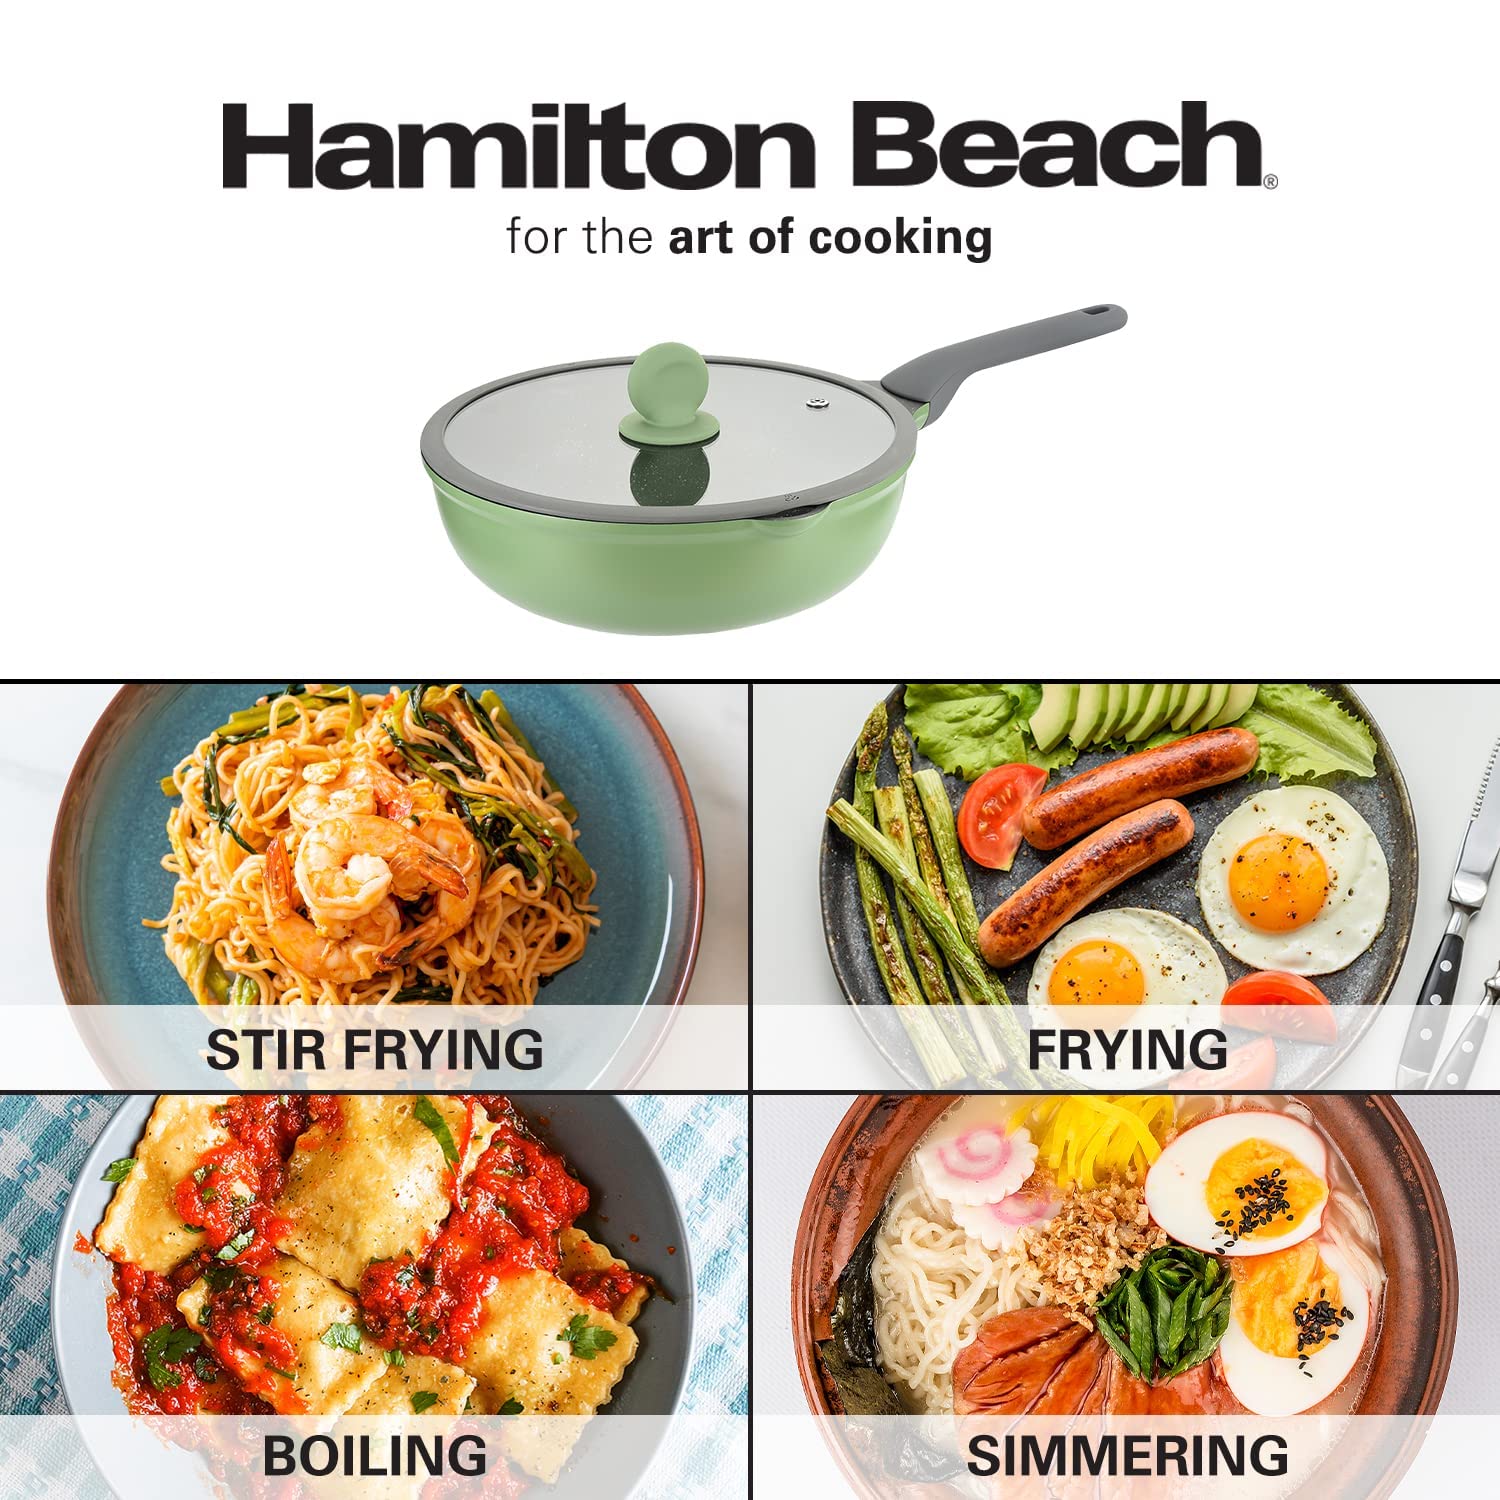 Hamilton Beach 5.5 Quart Dutch Oven Green with Marble Nonstick Coating,Die-Cast Aluminum Dutch Oven Pot Induction bottom, Gray Soft Touch Handle, Glass Lid with Silicone Rim for Cooking